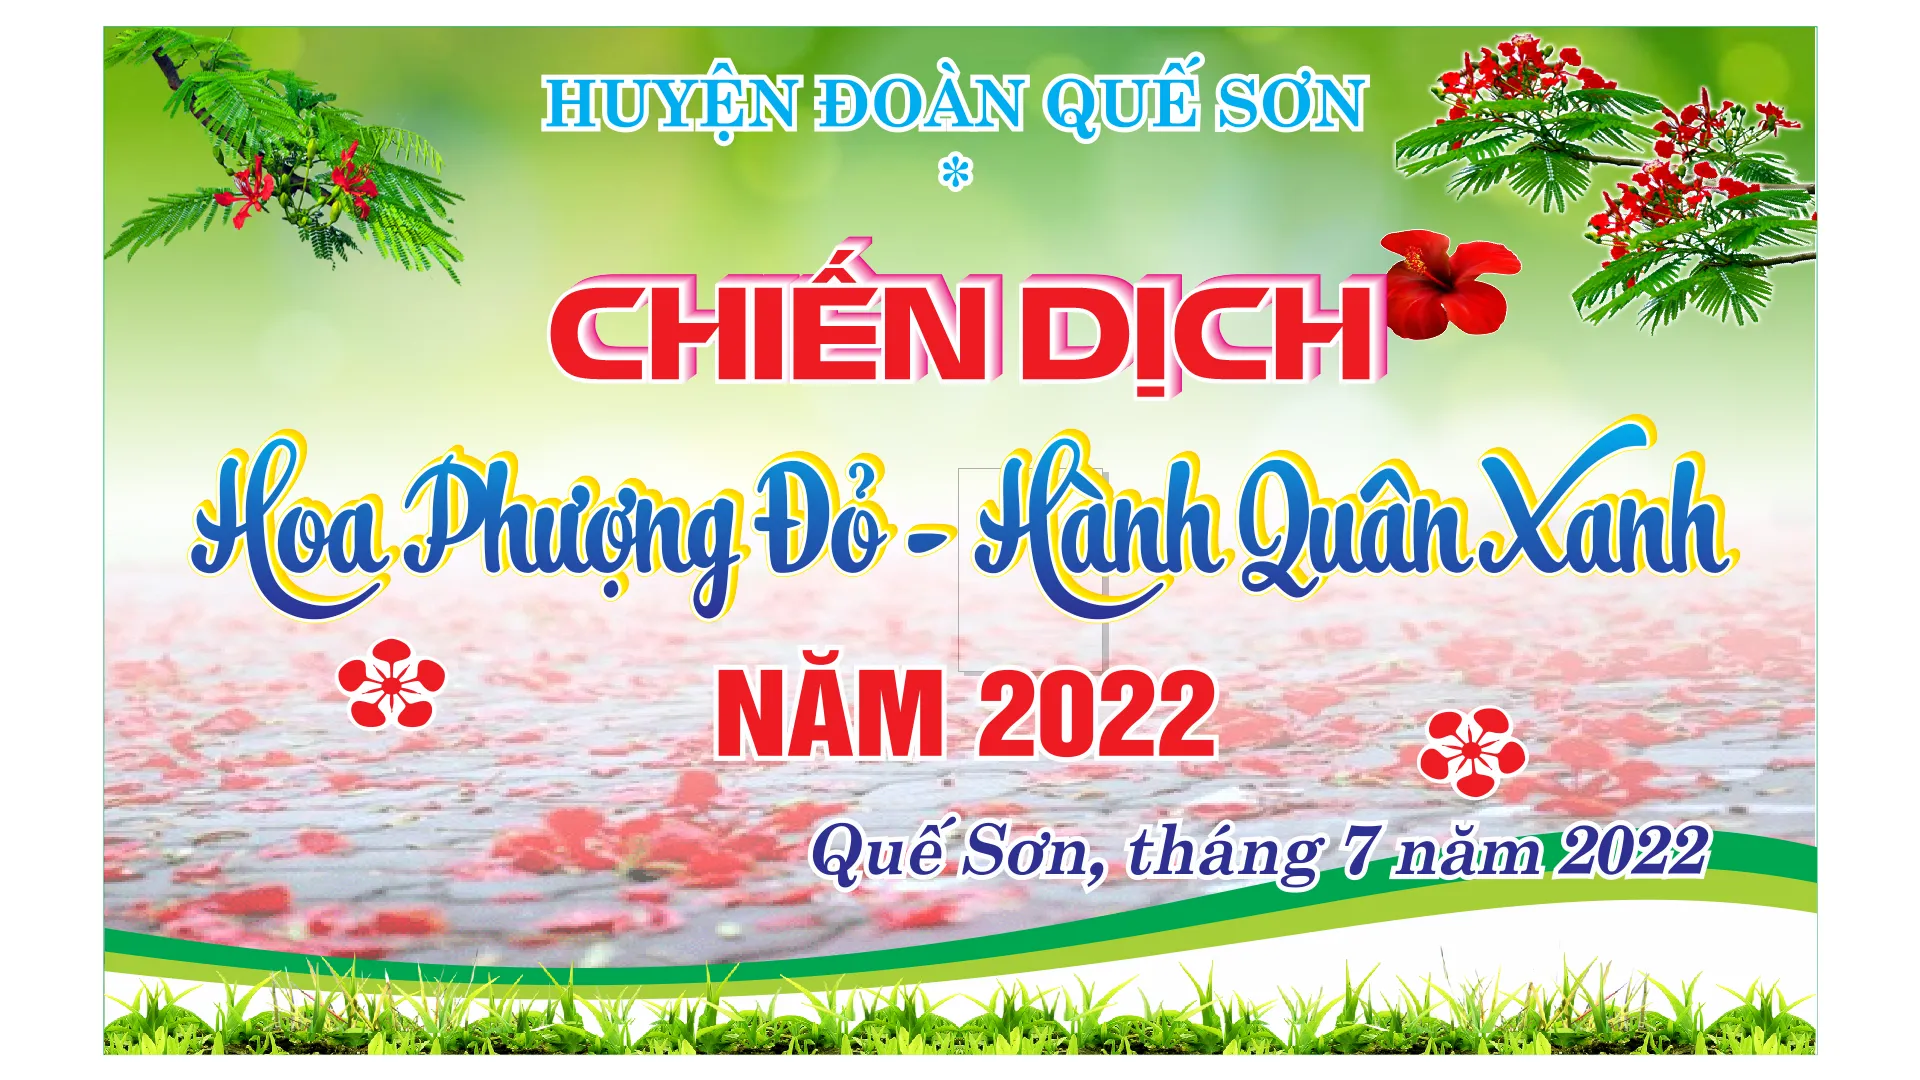 Chiến dịch \